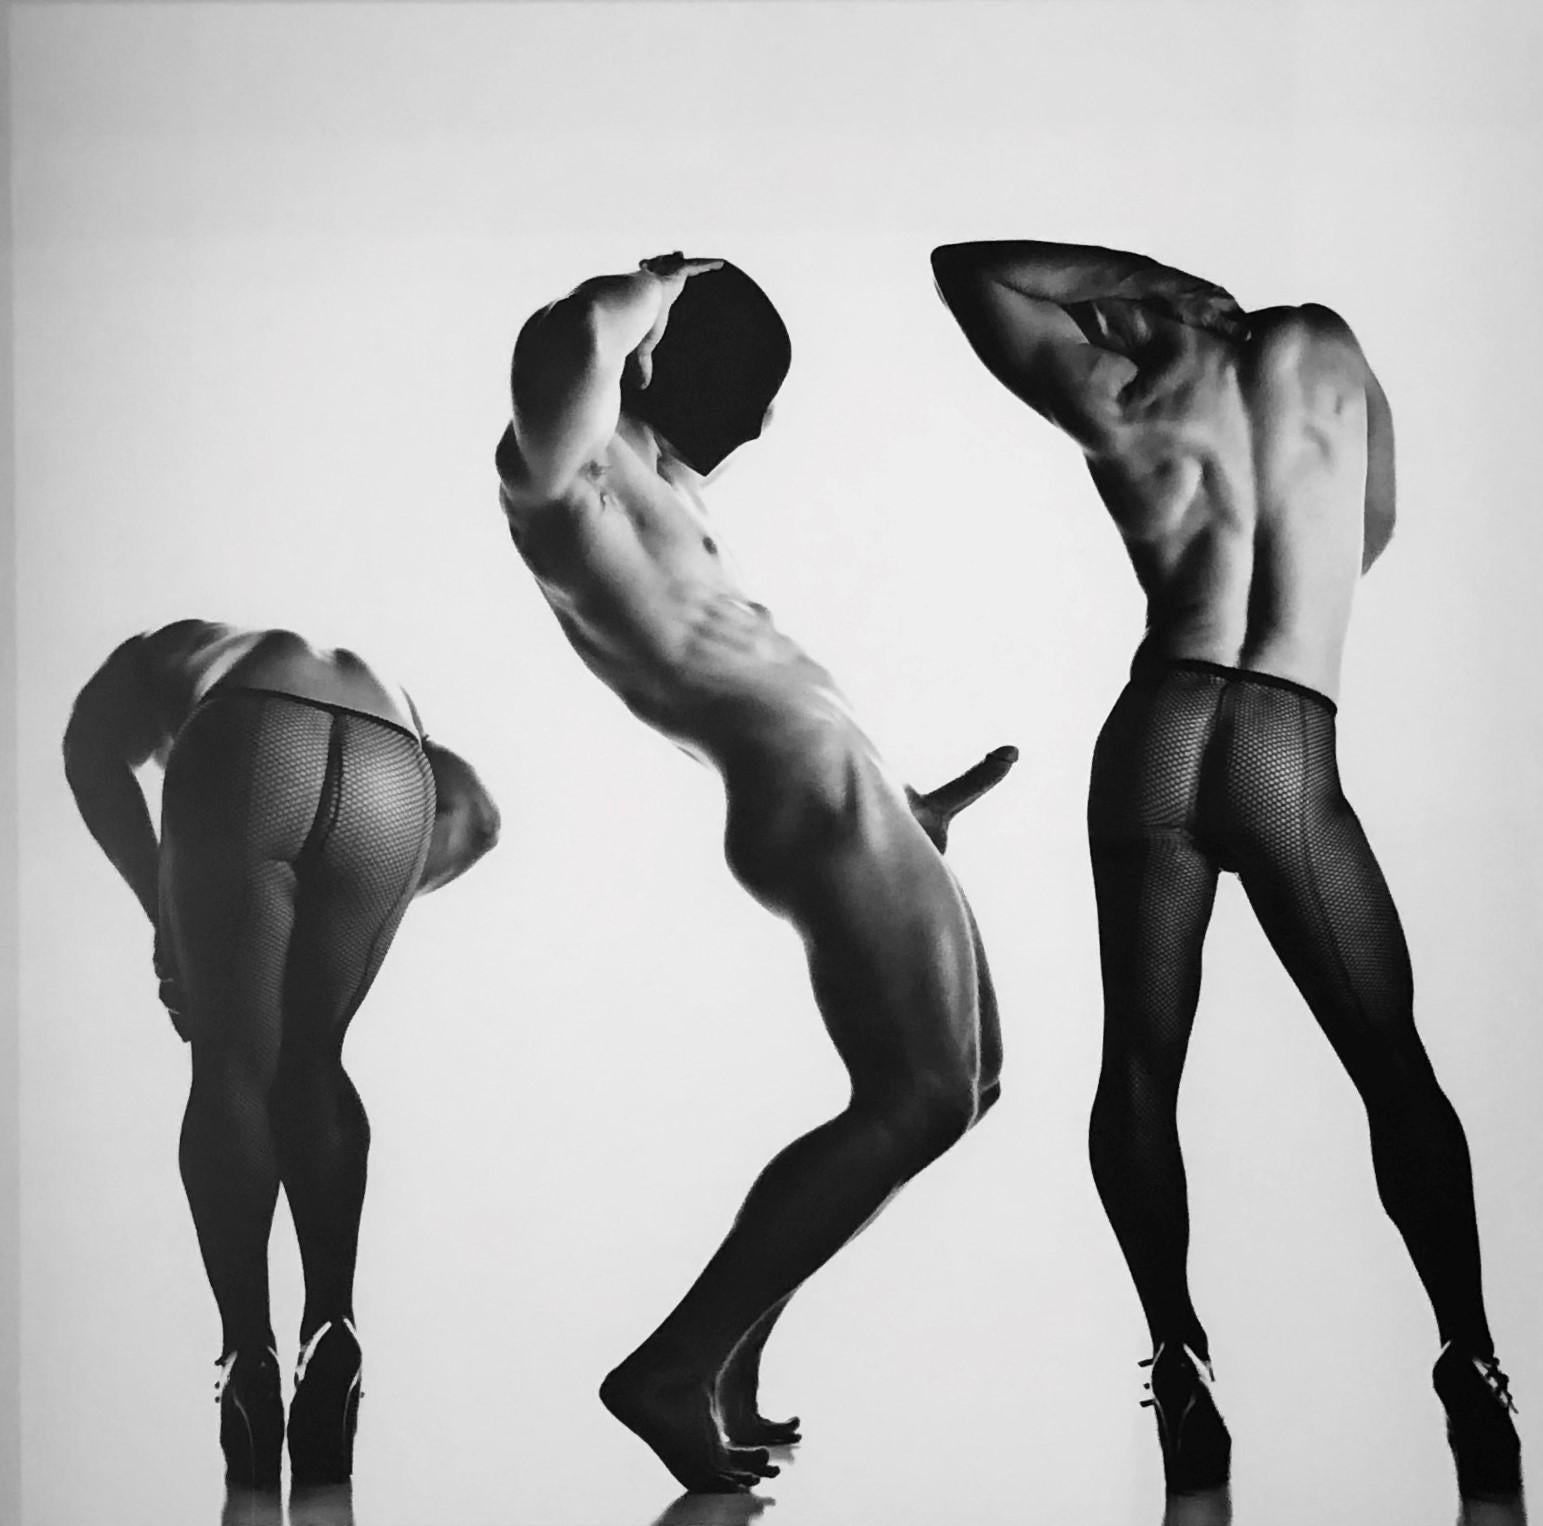 Doug Birkenheuer Black and White Photograph - Sex 3 - Erotic Male Photo, Fishnet Stockings and High Heals, Matted and Framed